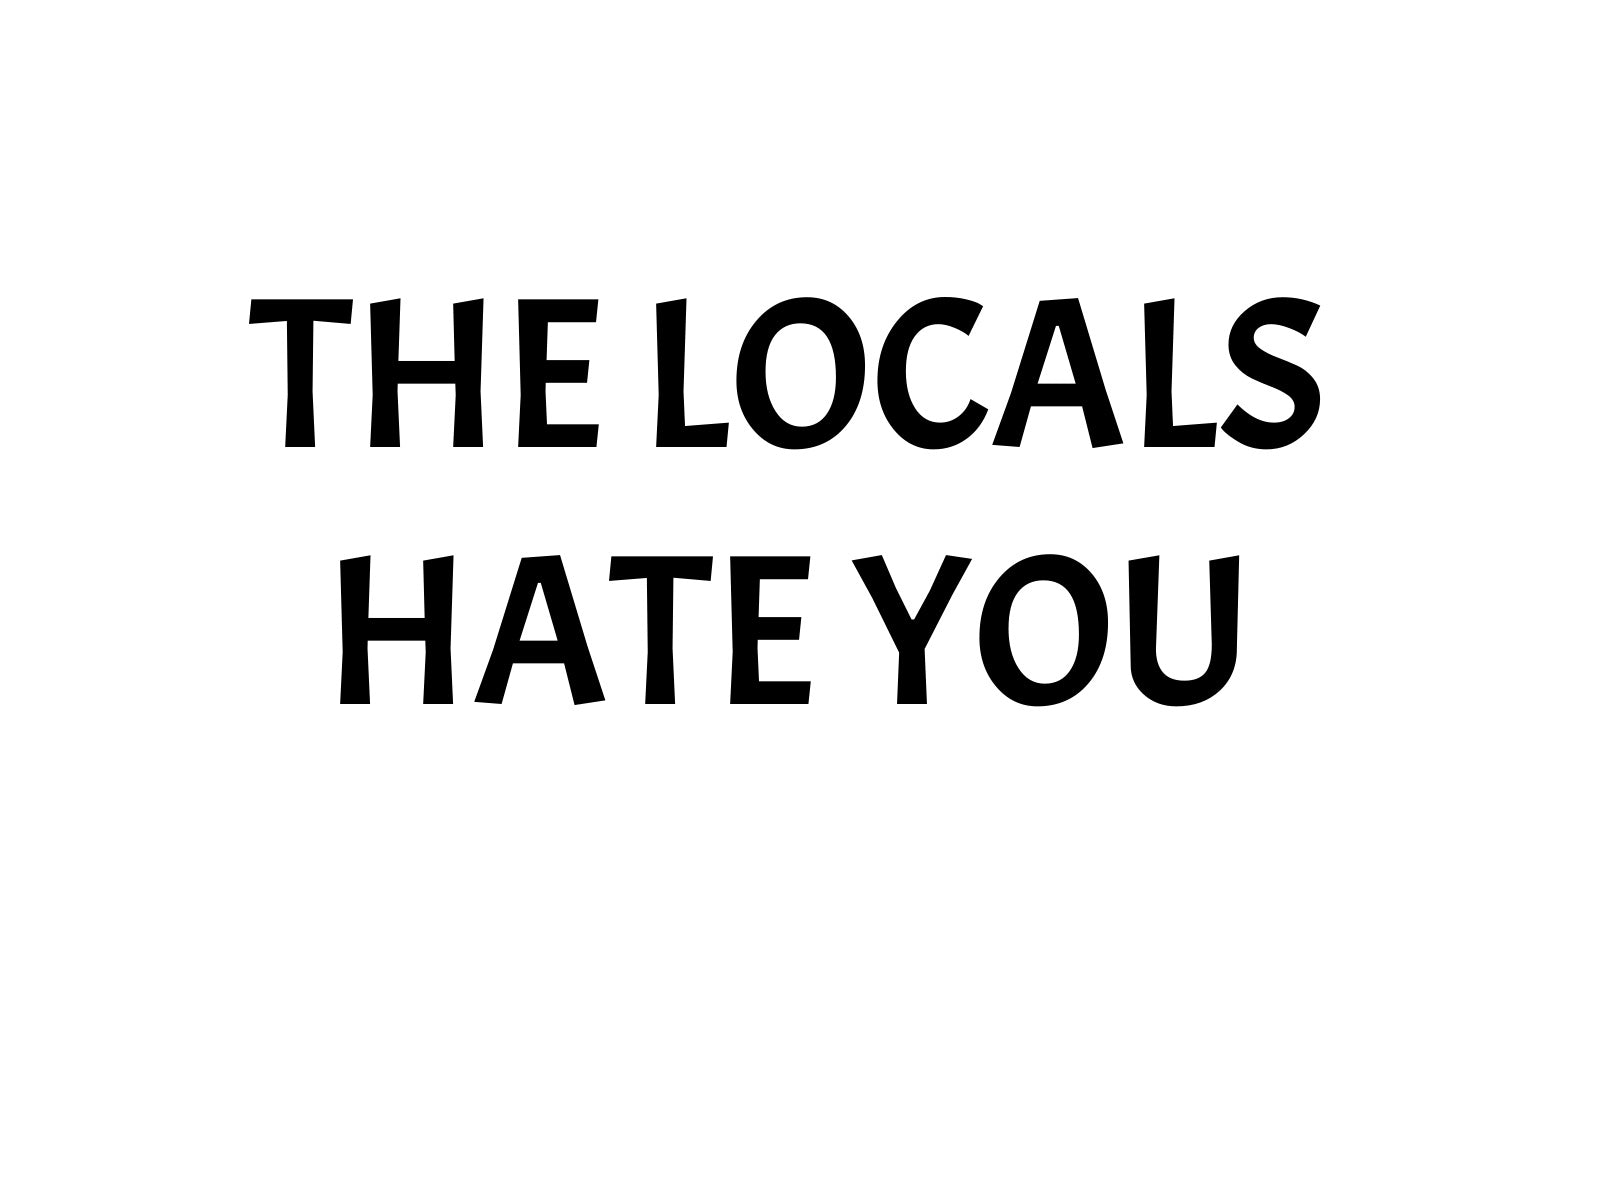 The Locals Hate You.